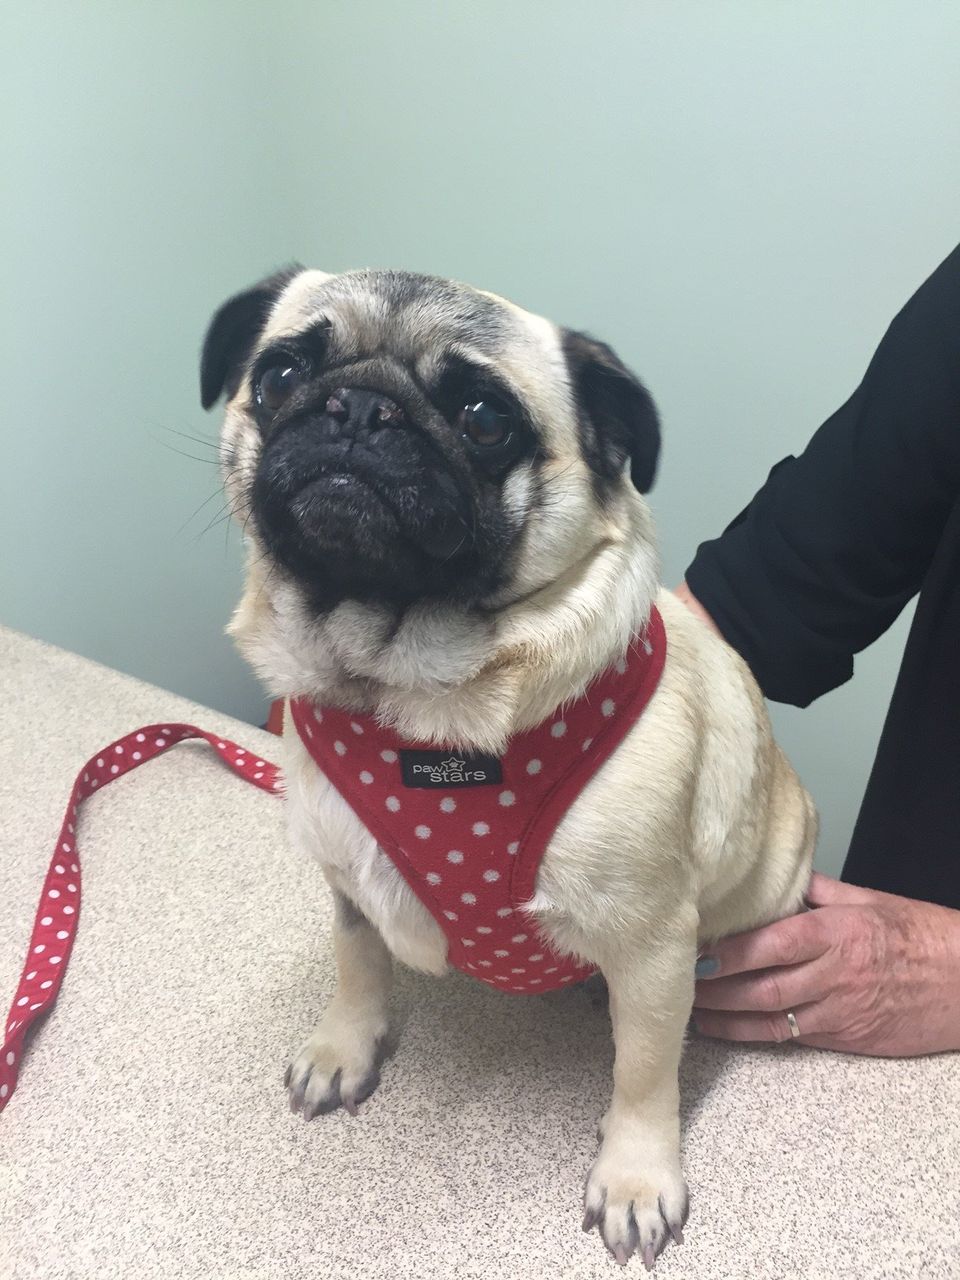 pug wearing red with polka dots